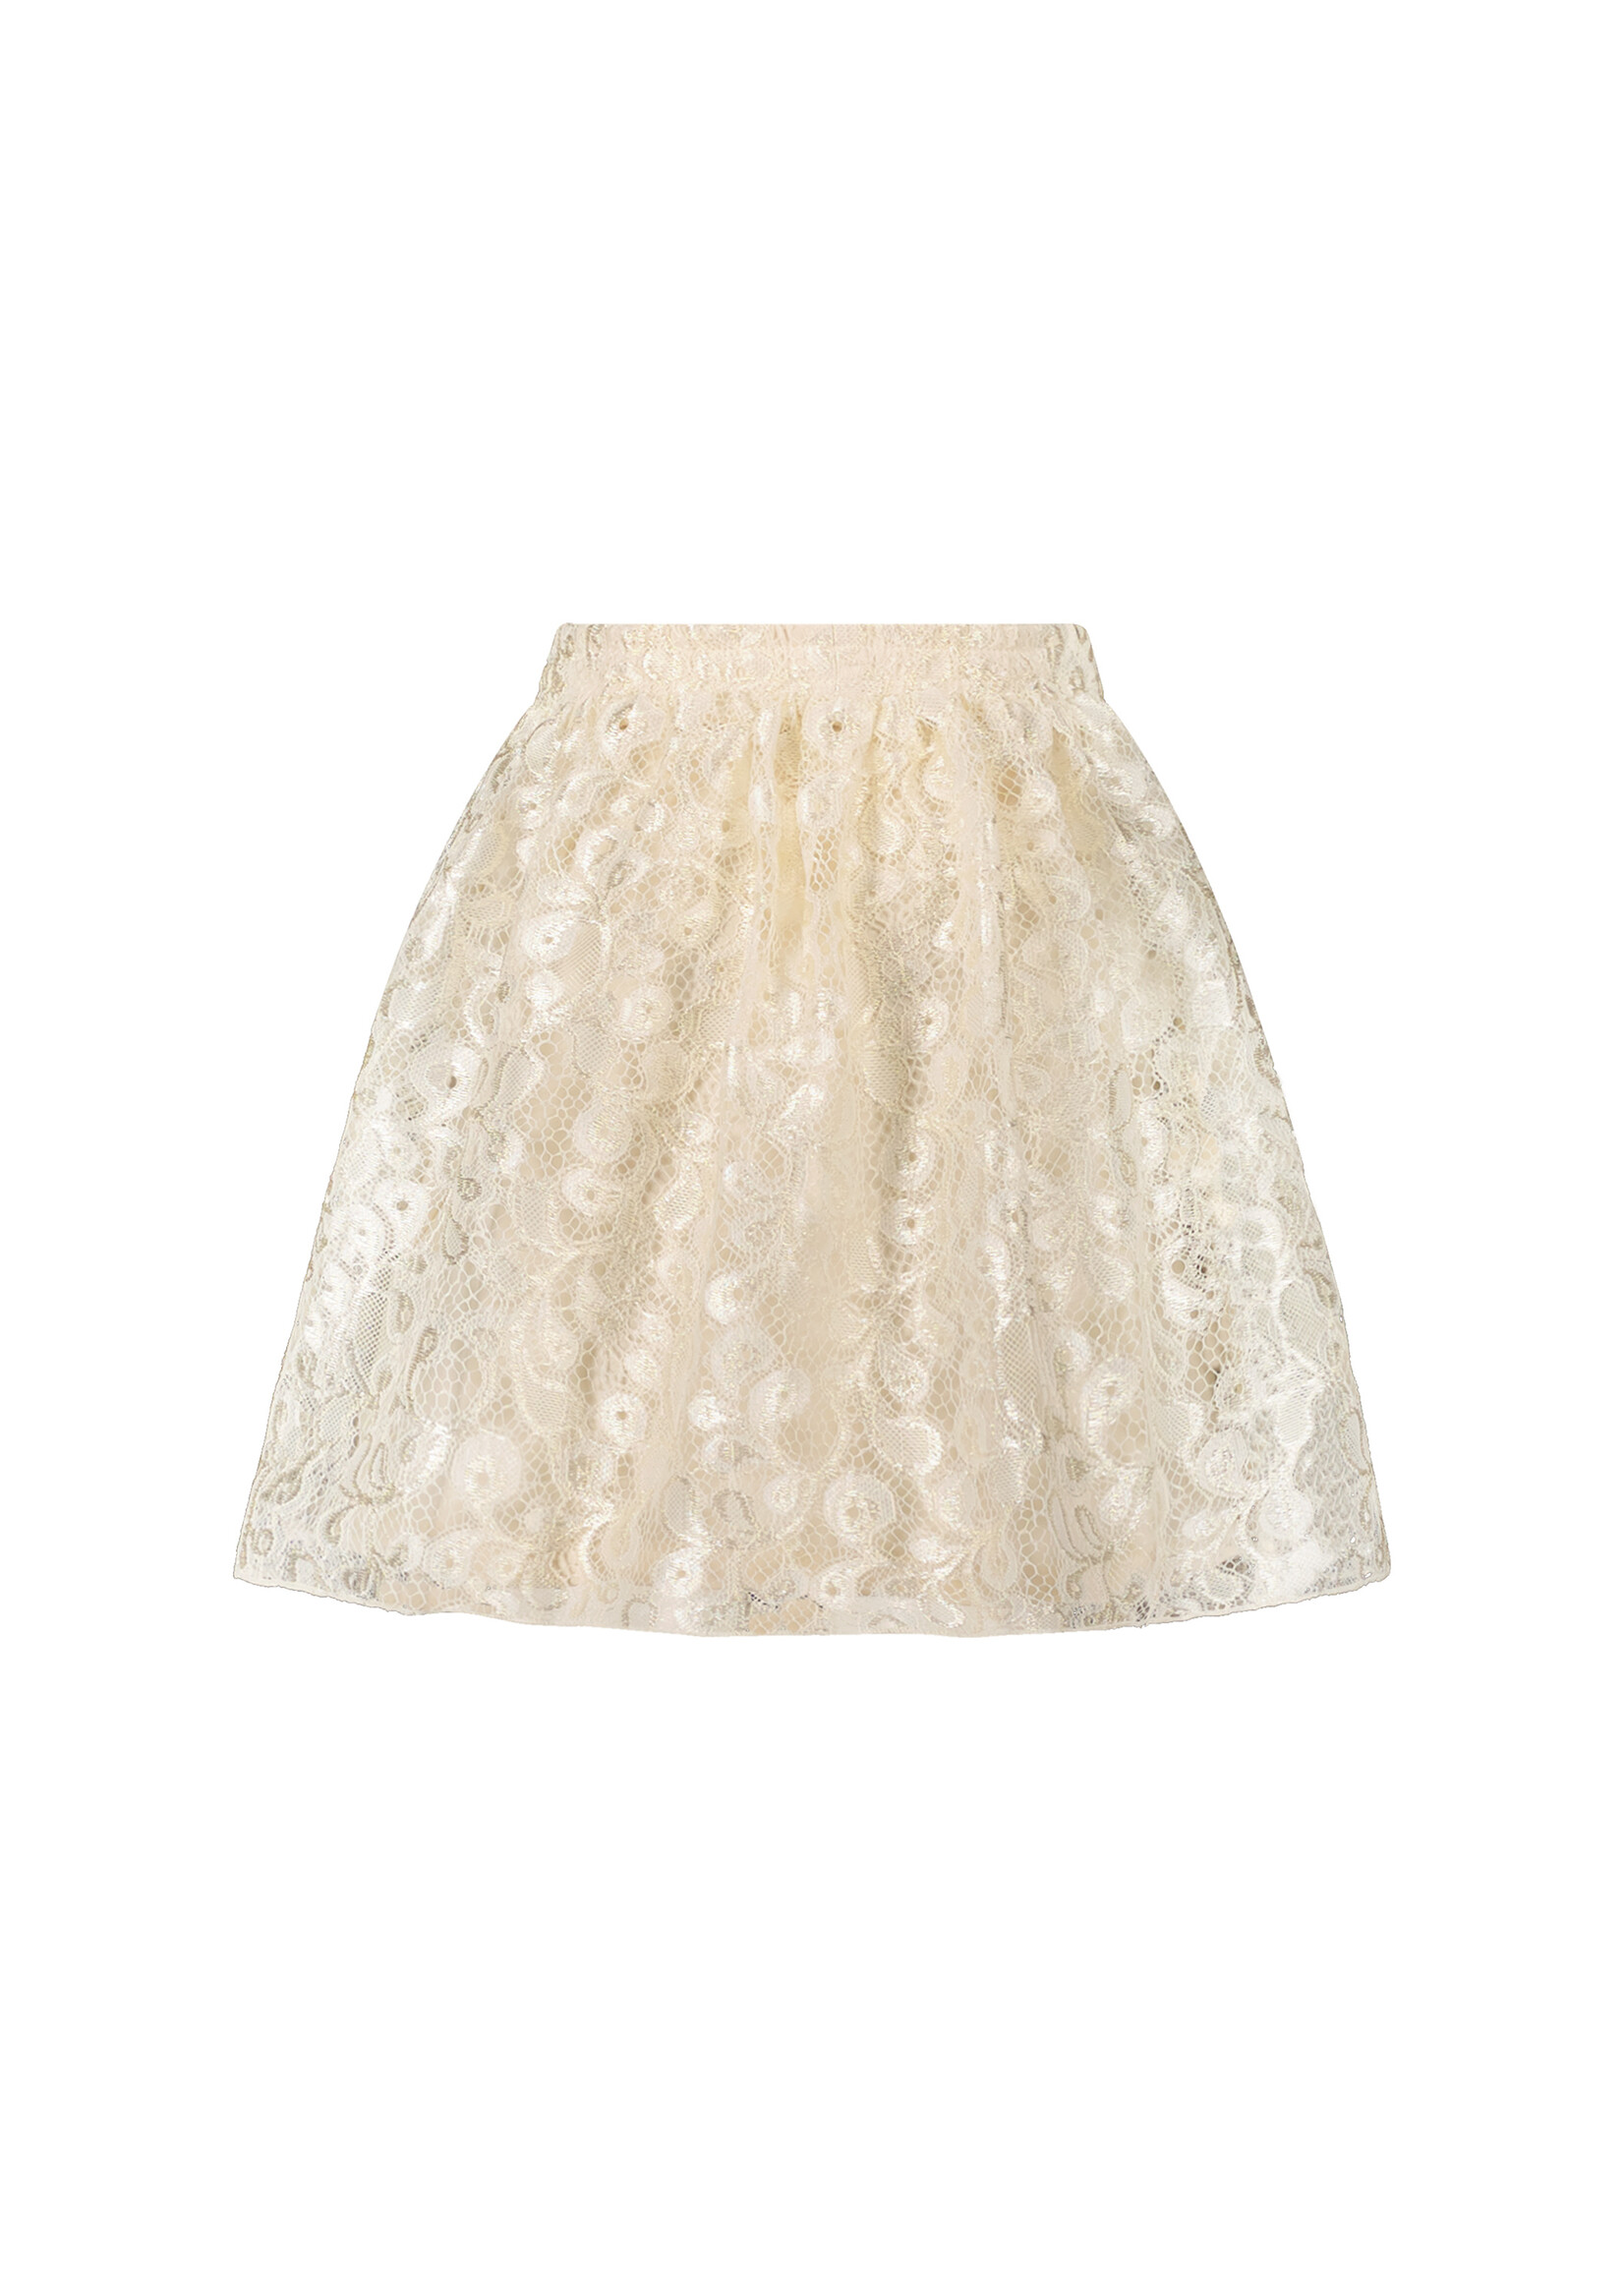 le chic truthy lace en pearls skirt